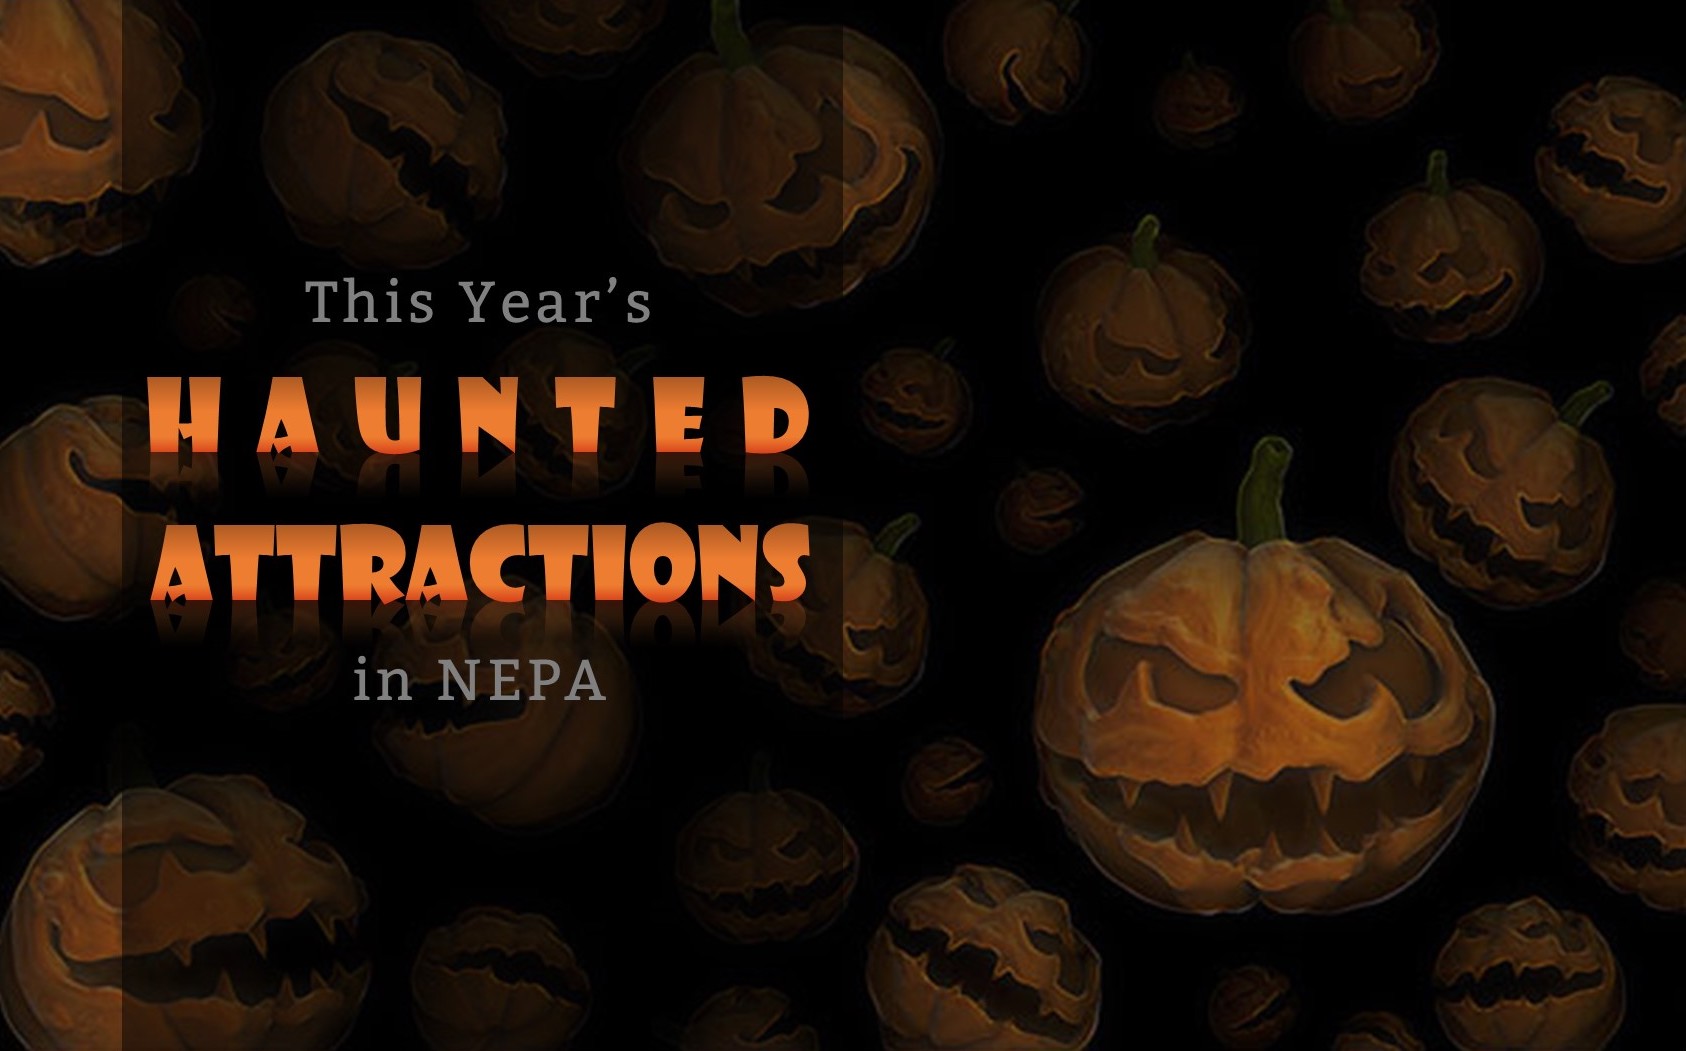 This Year’s Haunted Attractions in NEPA